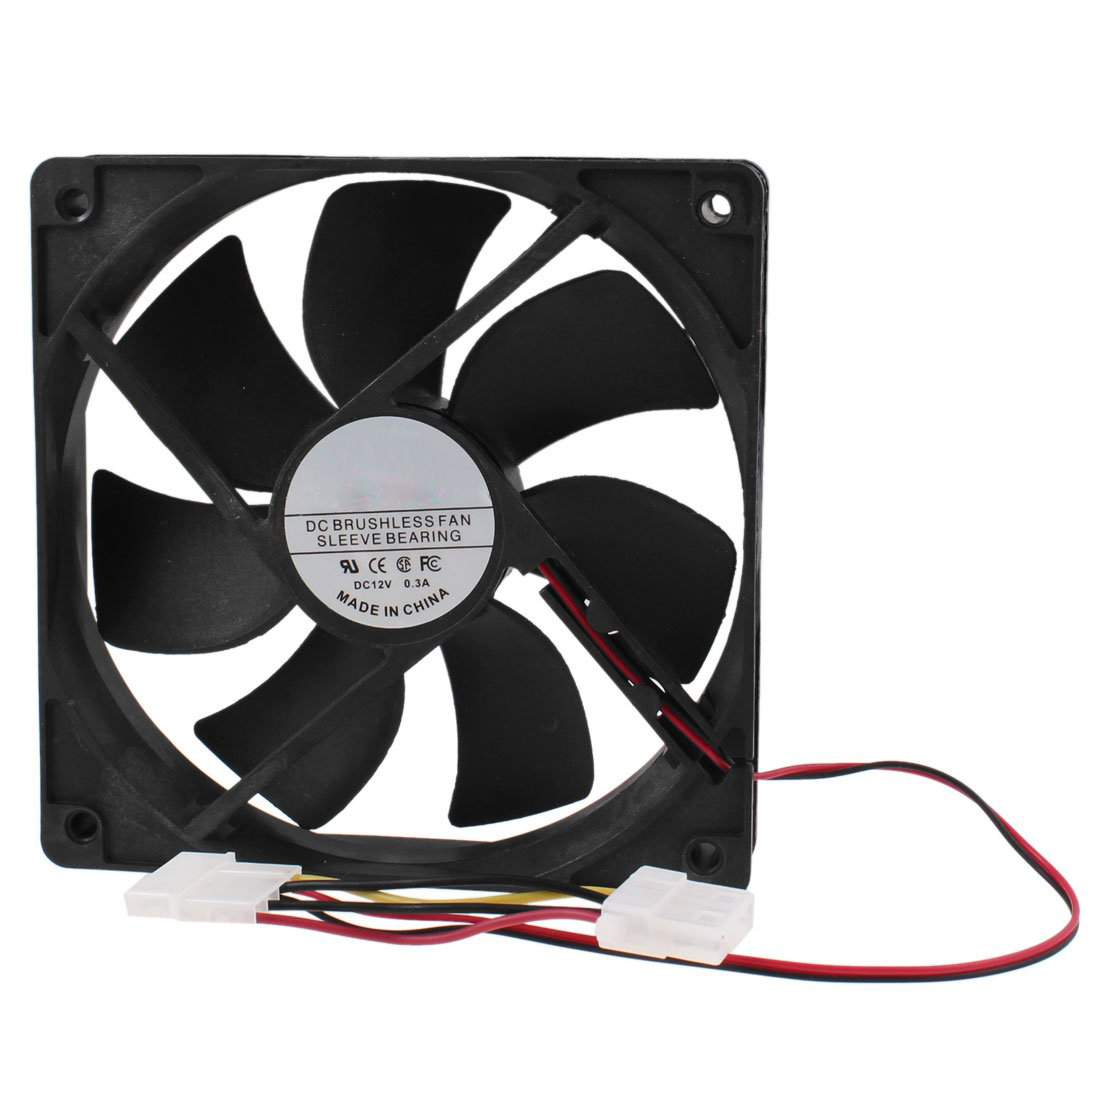 PC Brushless DC Cooling Fan 4 Pin Connector 7 Blades 12V 12cm 120mm